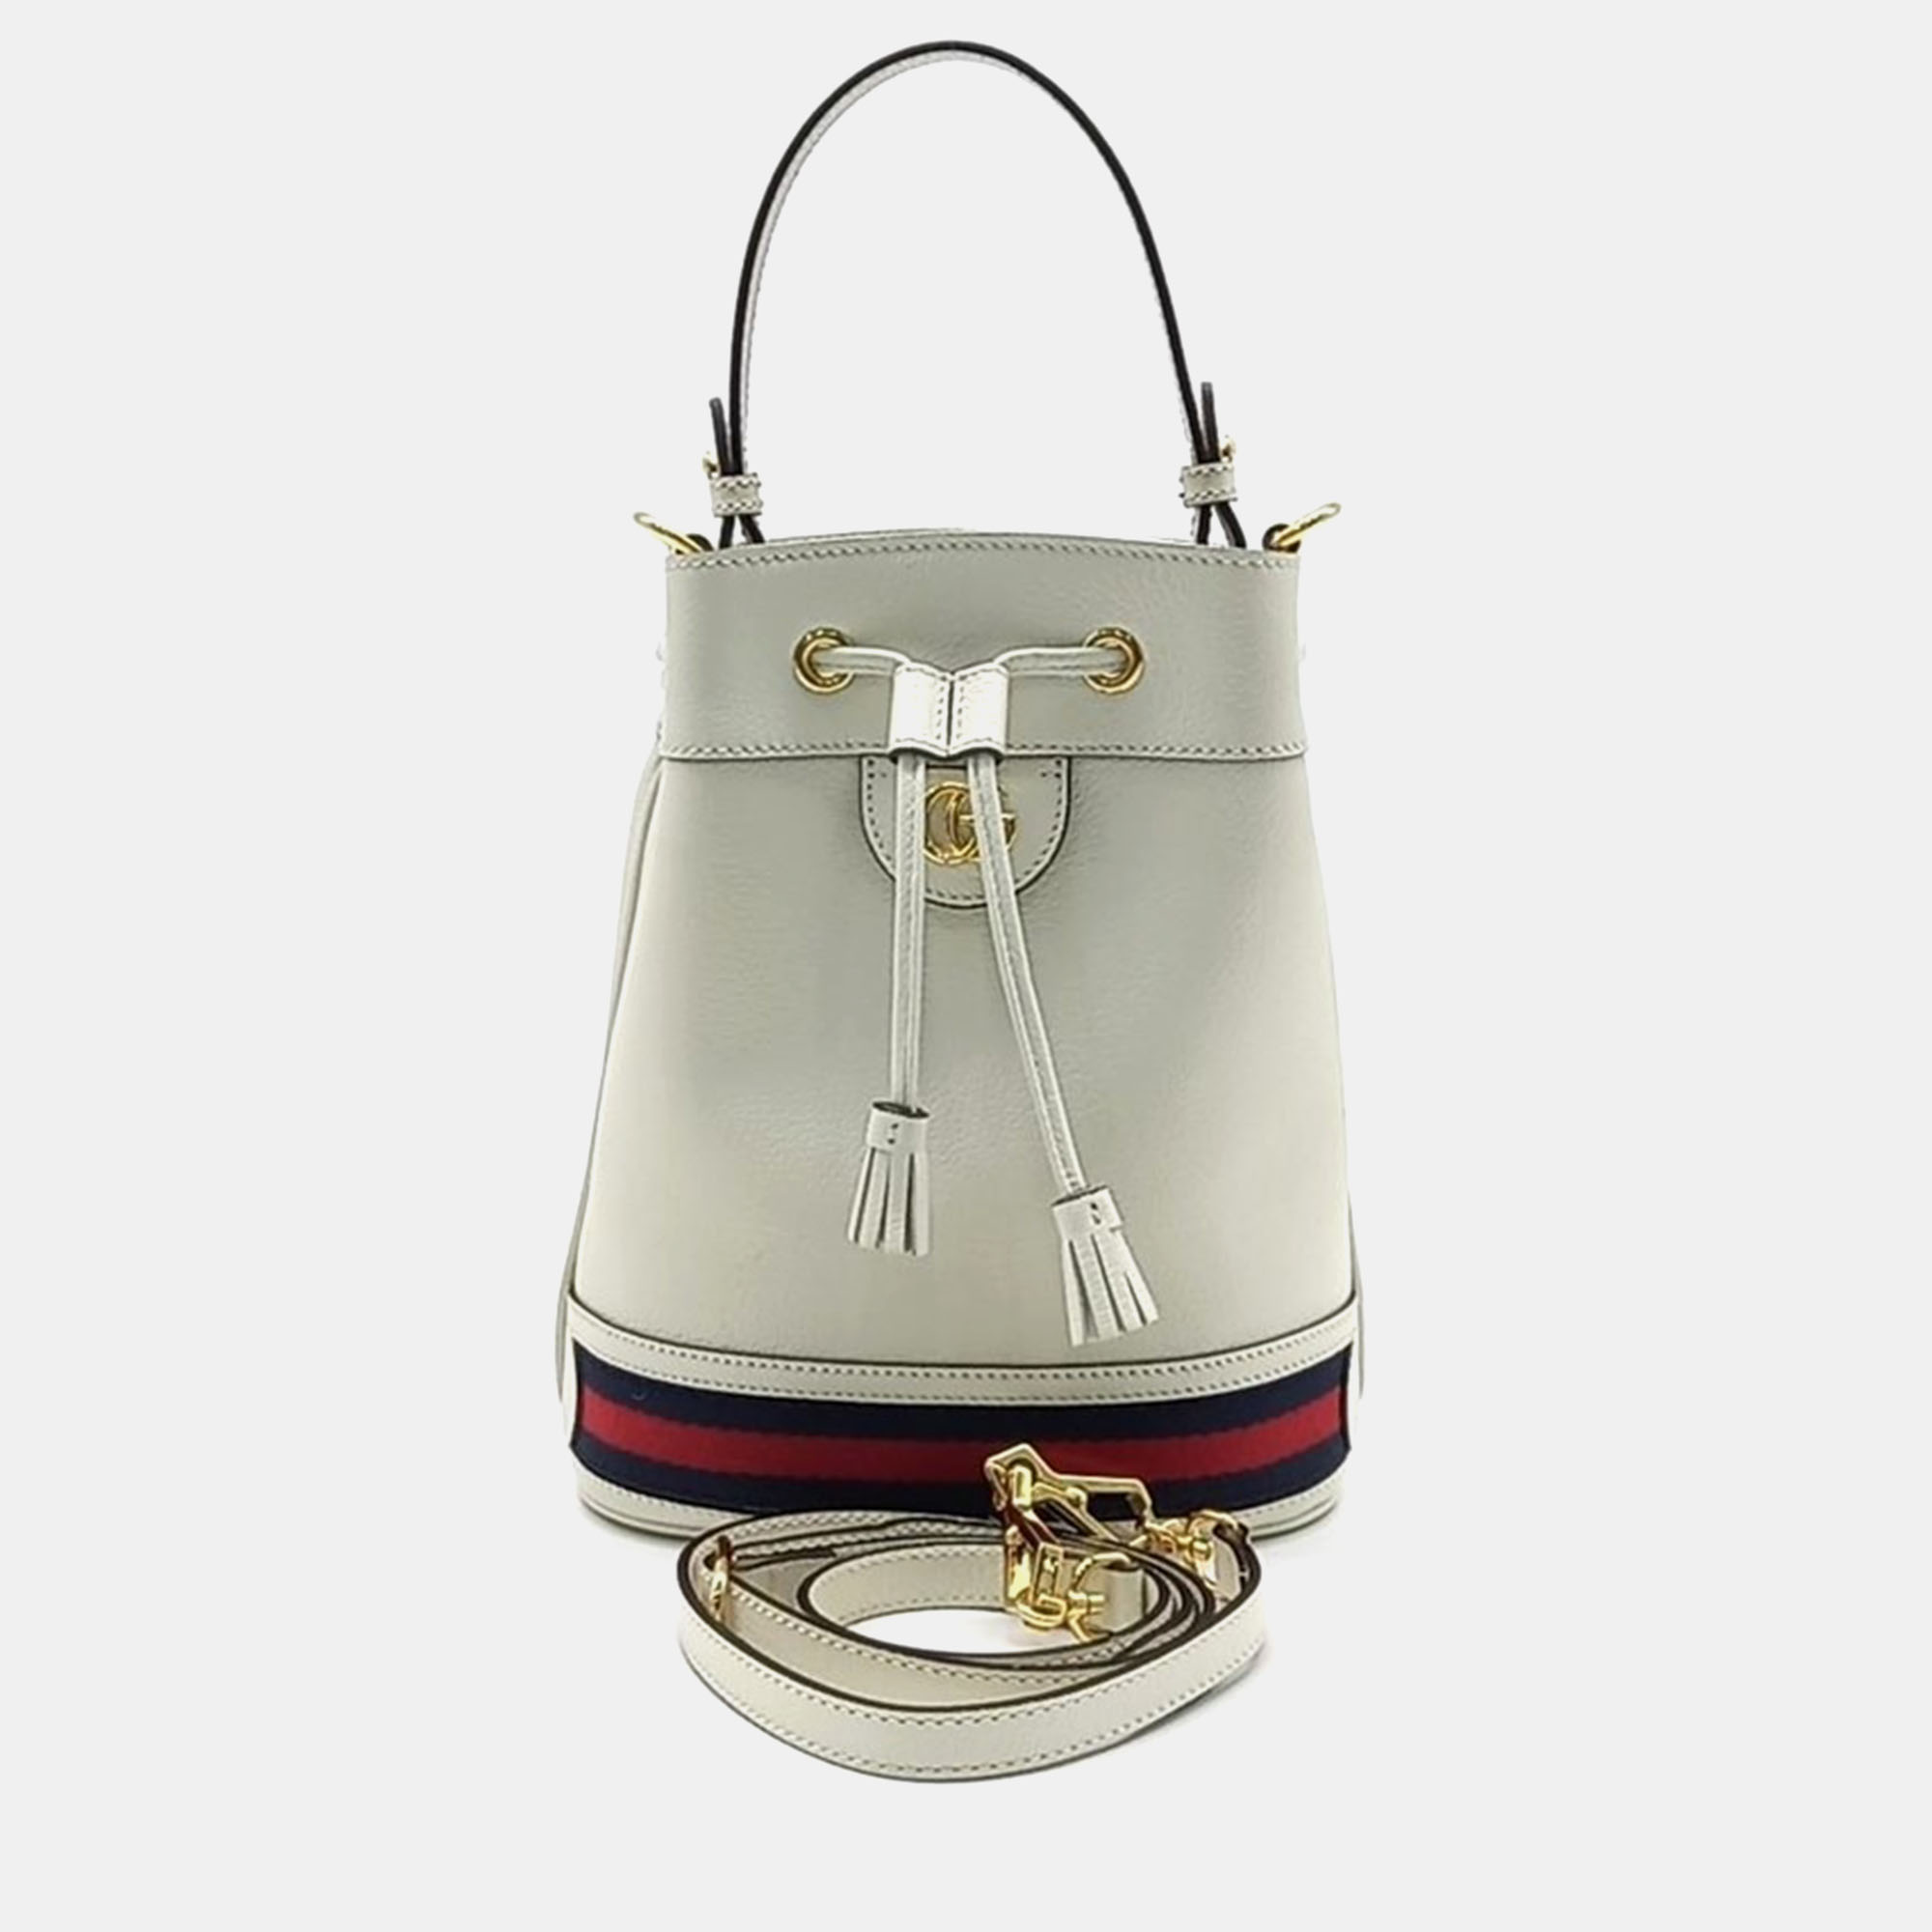 Gucci ophidia small bucket bag